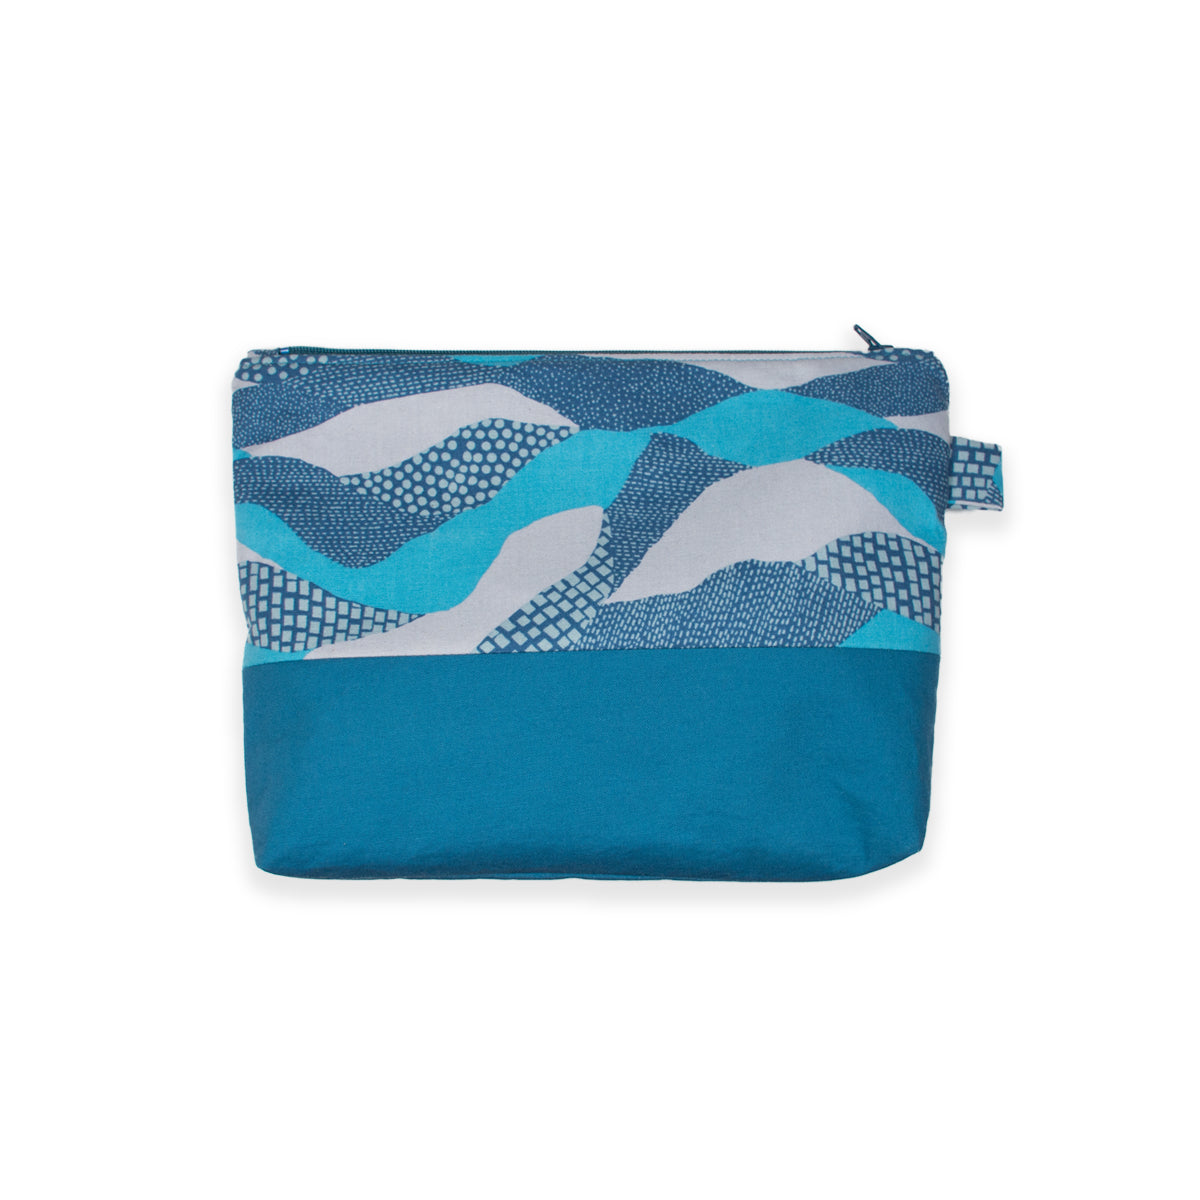 100% cotton zip case featuring abstract wave design in various shades of blue